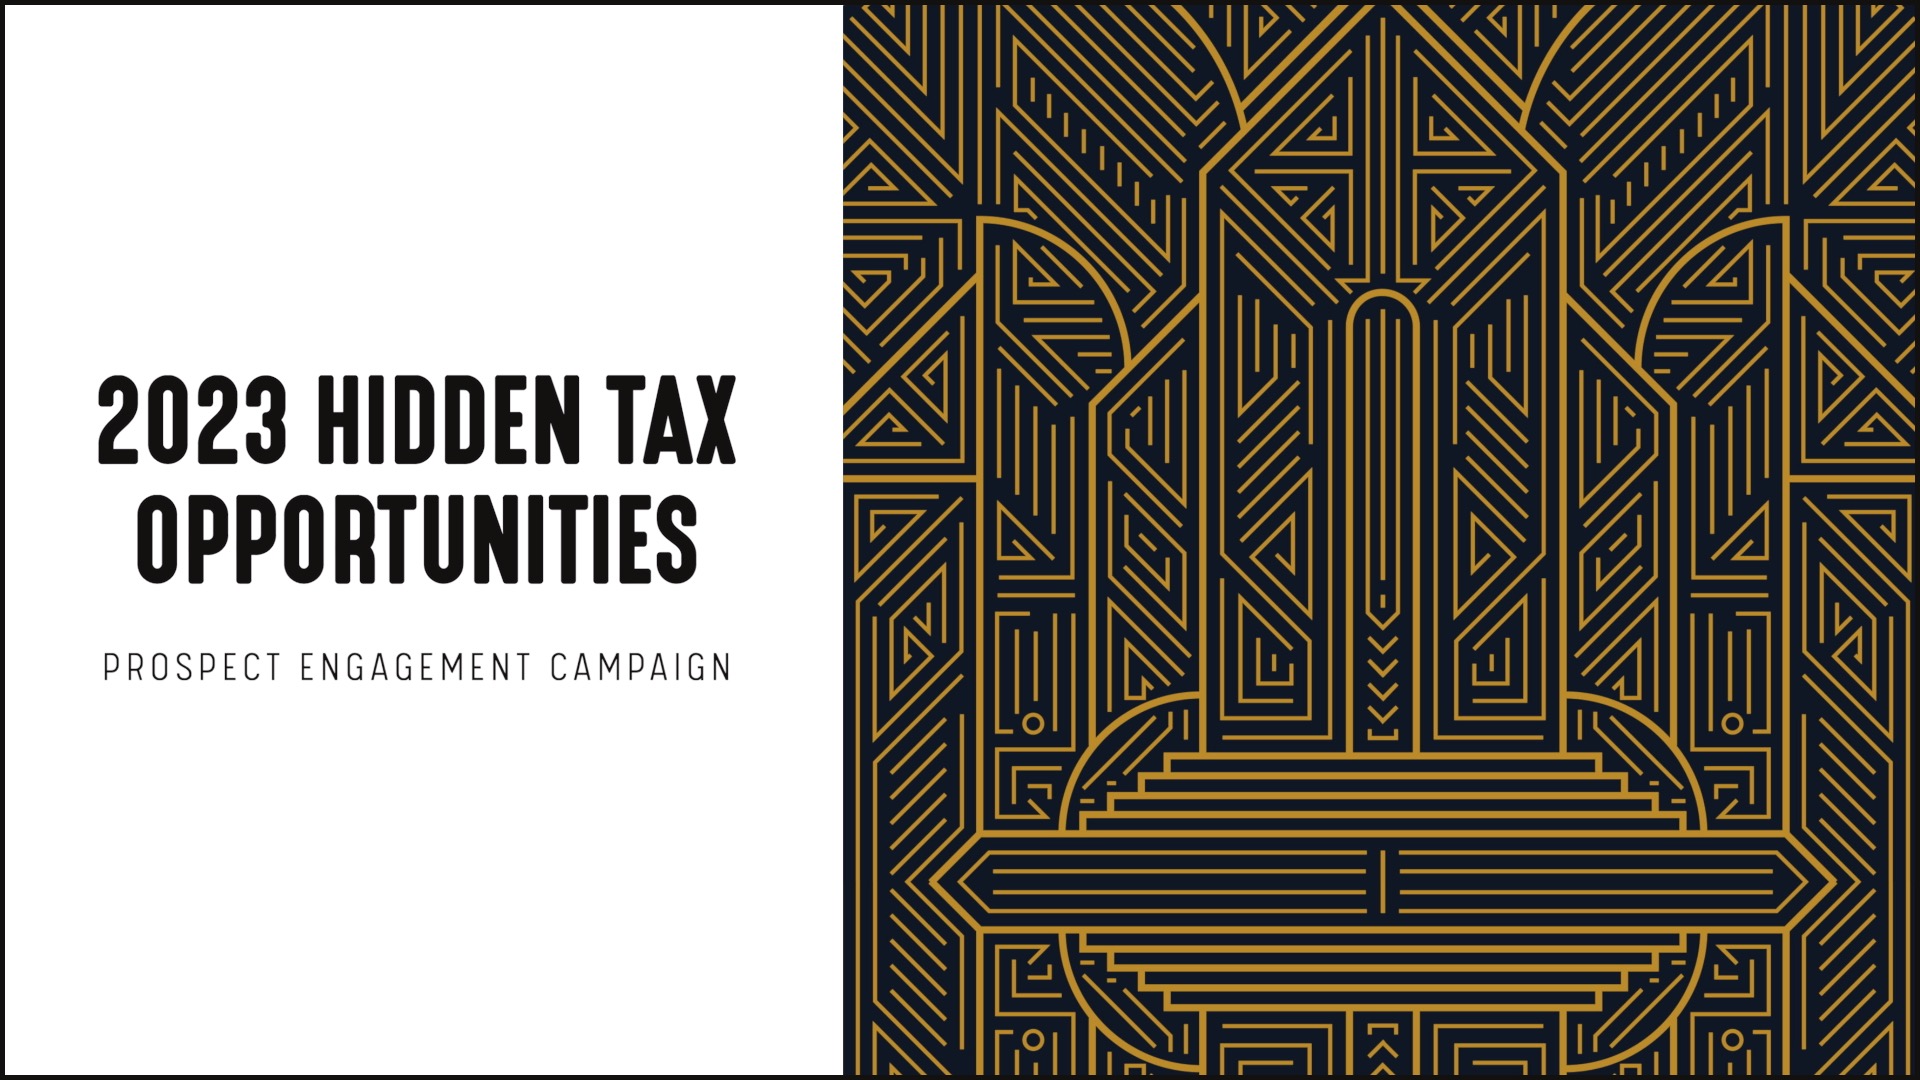 [NEW] 2023 Hidden Tax Opportunities - Prospect Engagement Campaign for Financial Advisors